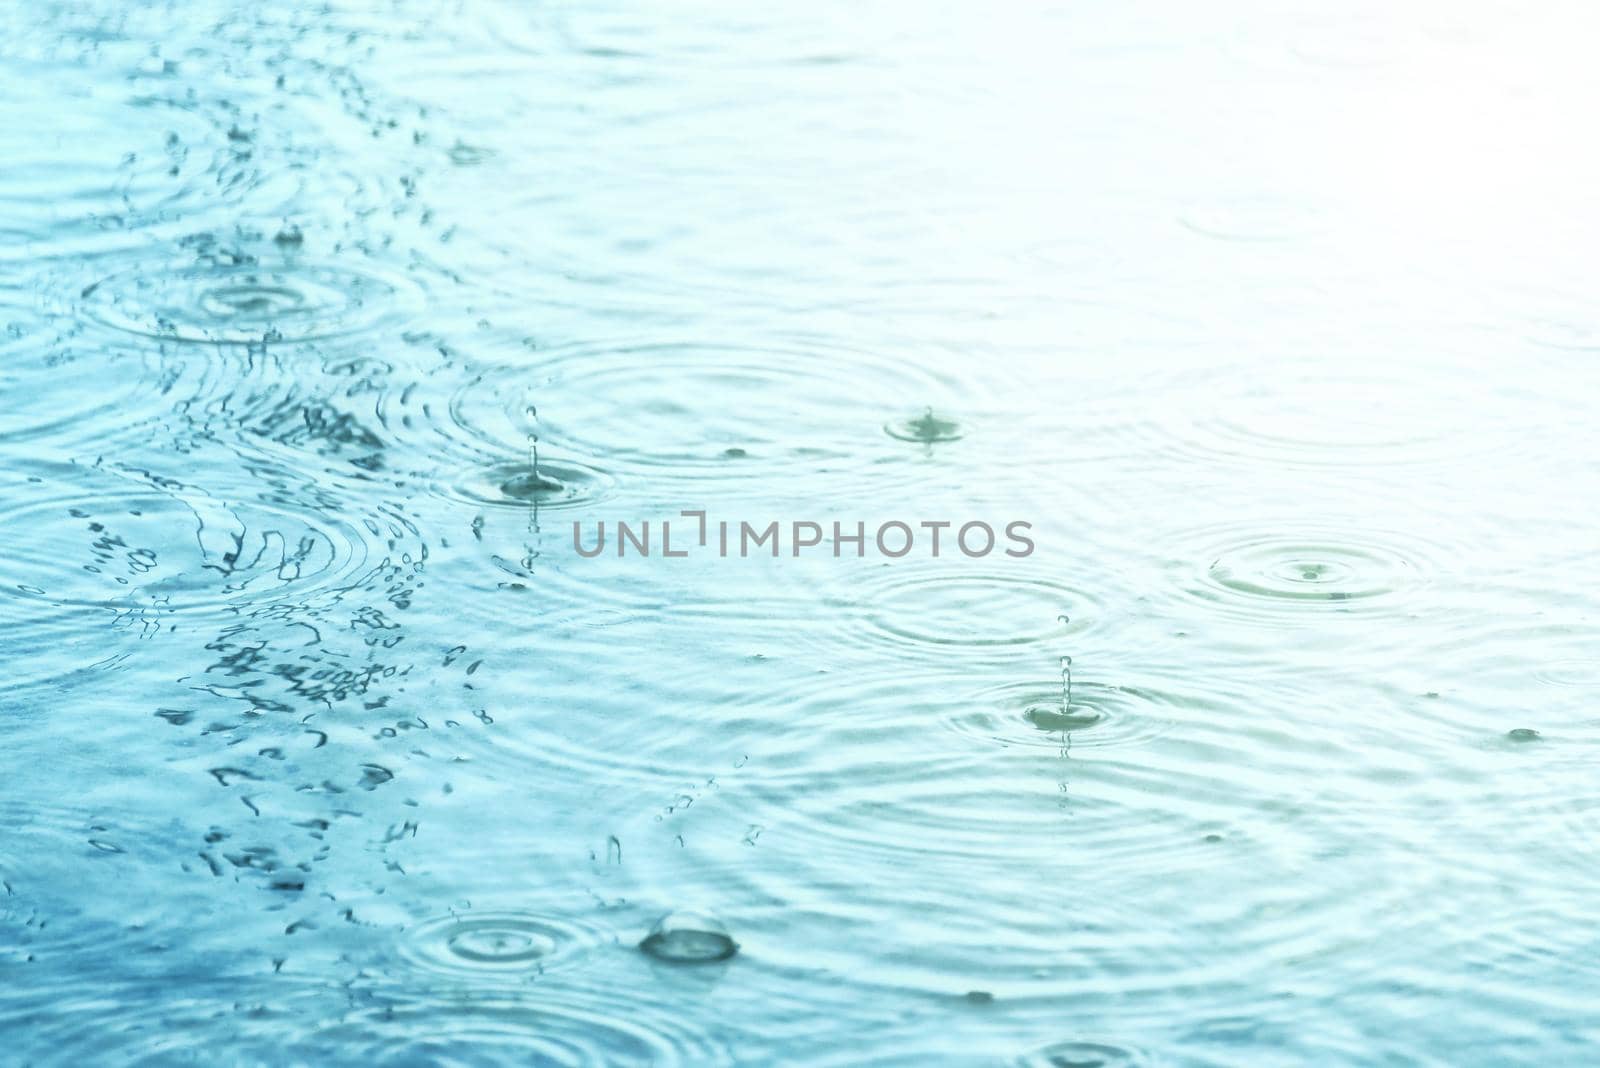 Raindrops creating concentric circles and droplets on water surface by dutourdumonde